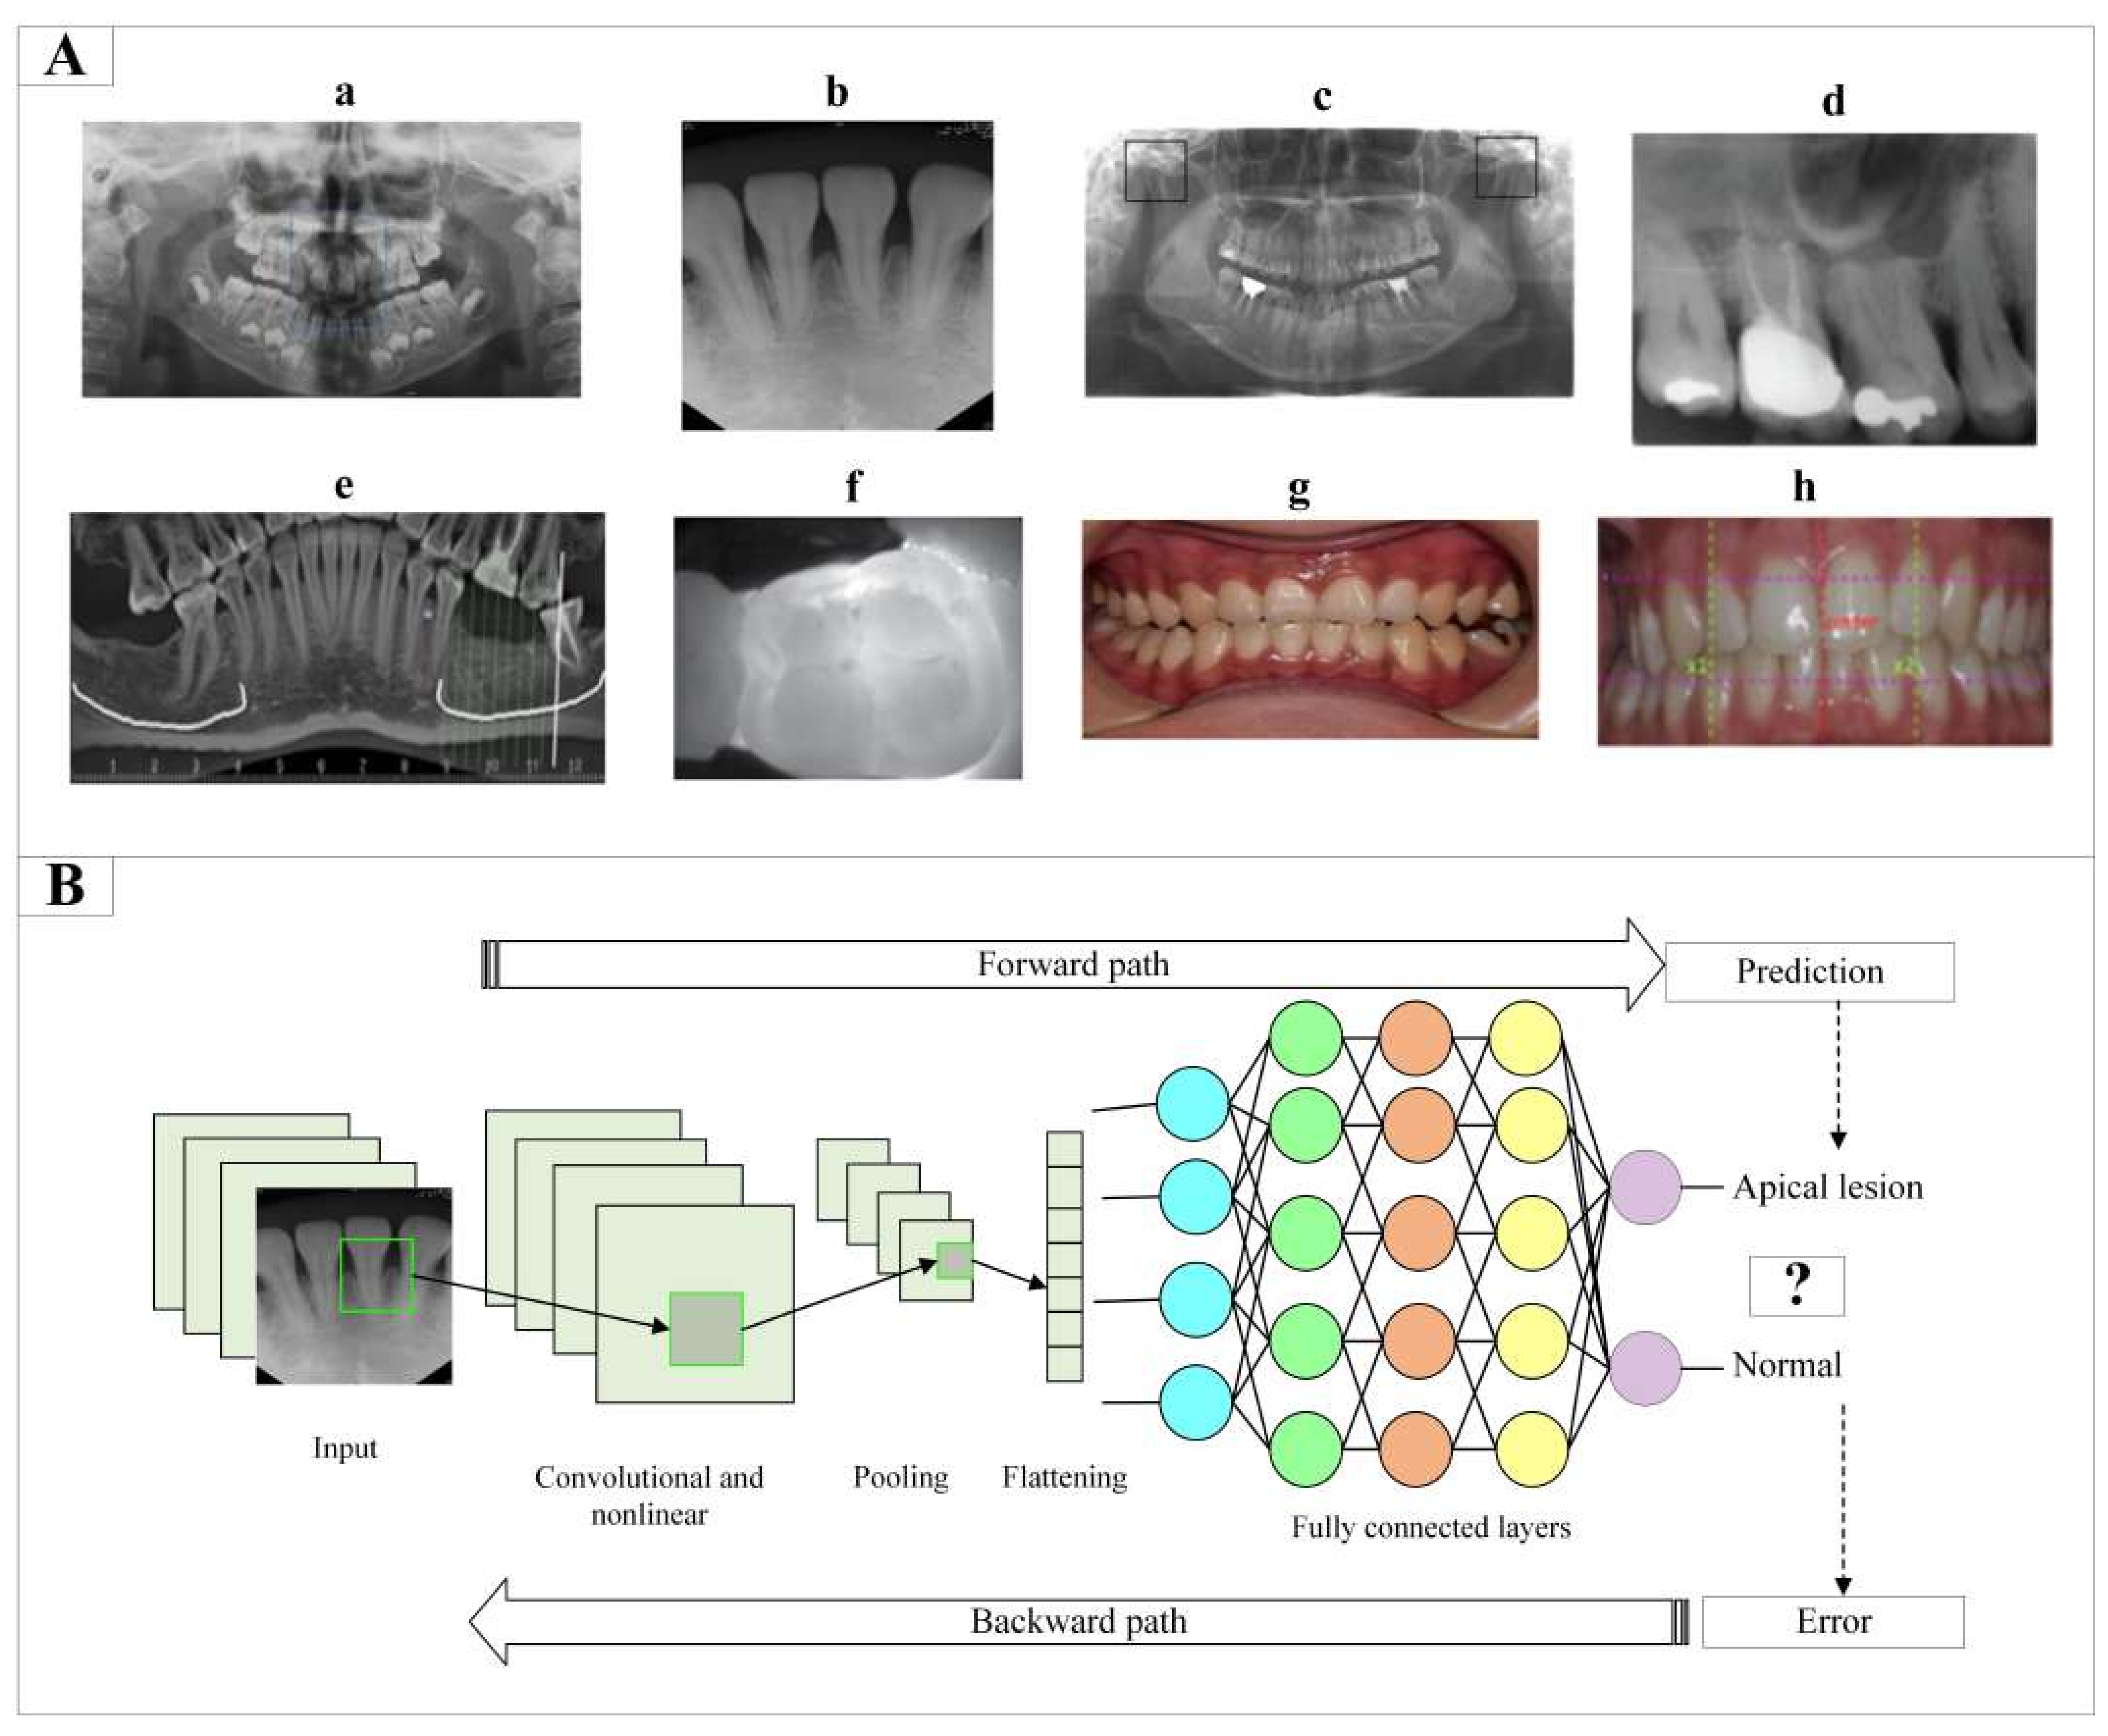 AI for efficiency, reliability and accuracy in practice - Dentistry